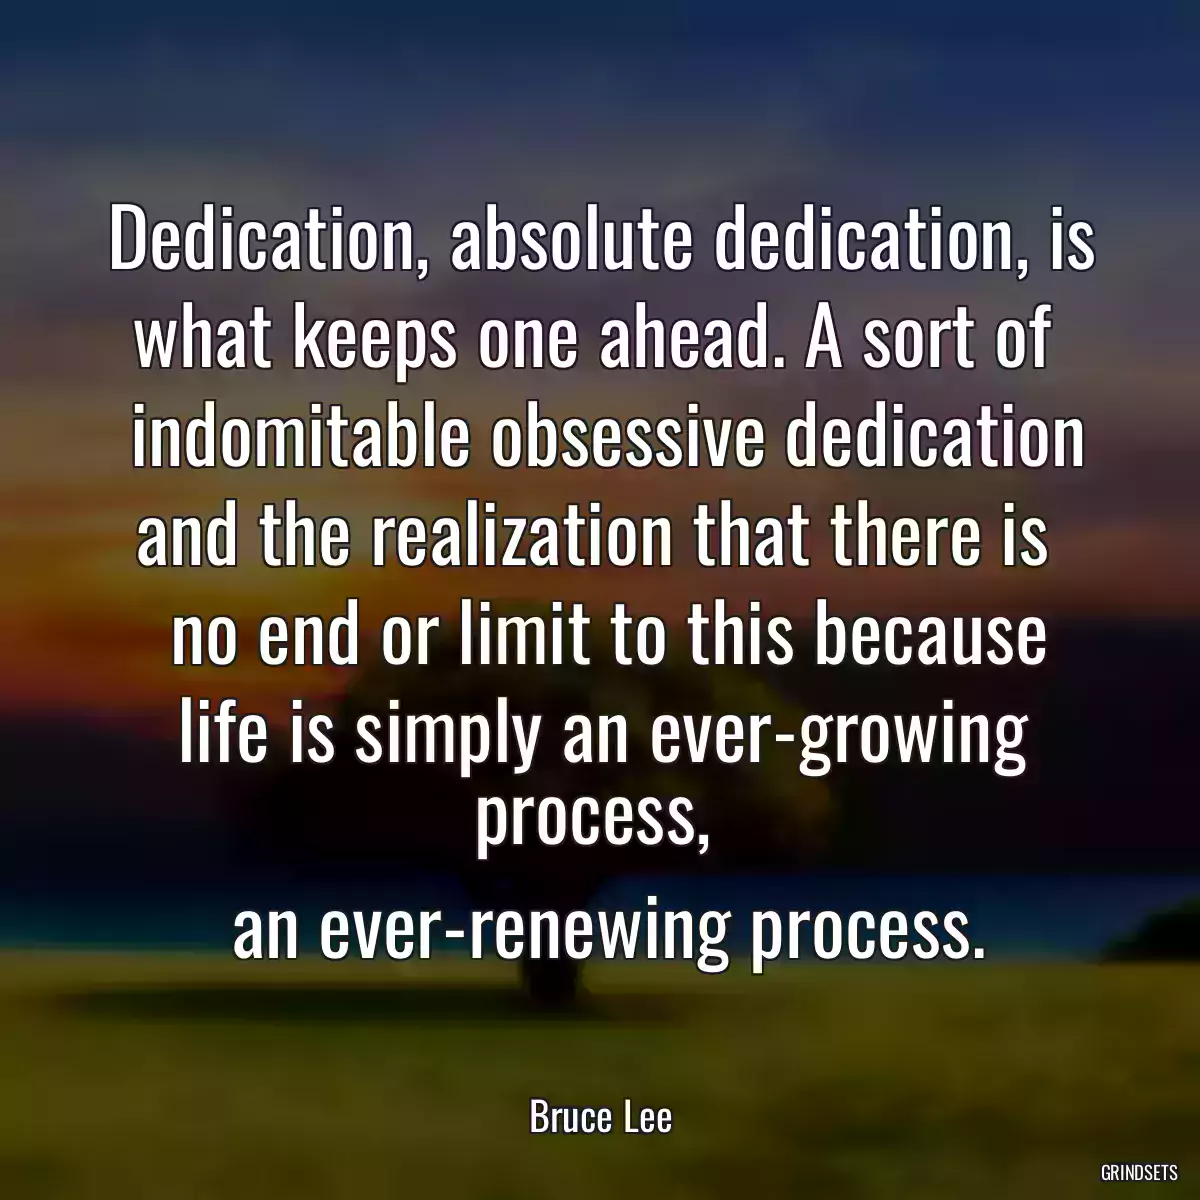 Dedication, absolute dedication, is what keeps one ahead. A sort of 
 indomitable obsessive dedication and the realization that there is 
 no end or limit to this because life is simply an ever-growing process, 
 an ever-renewing process.